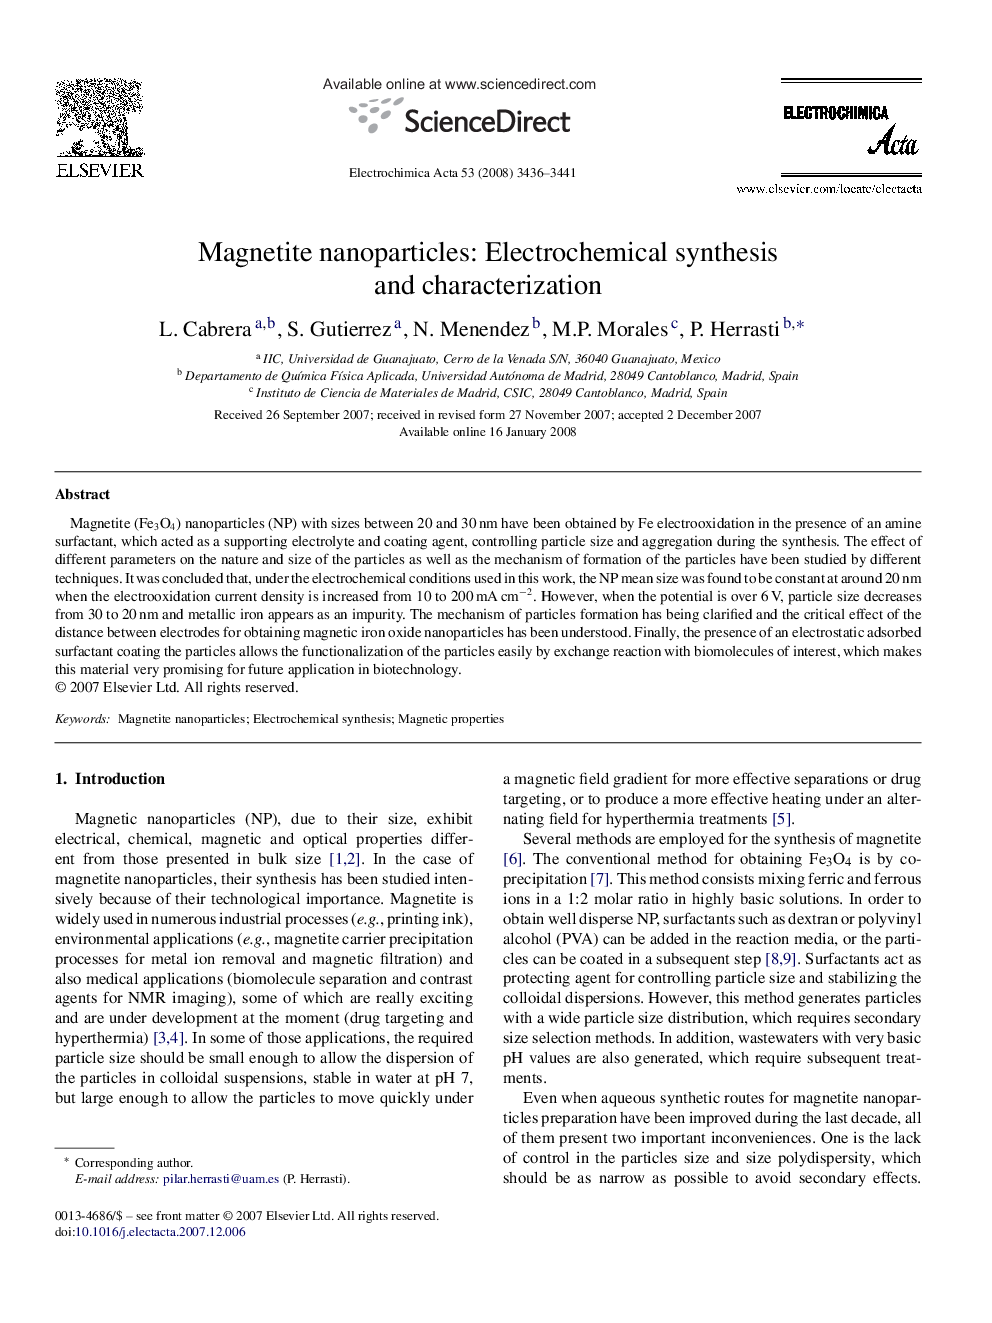 Magnetite nanoparticles: Electrochemical synthesis and characterization